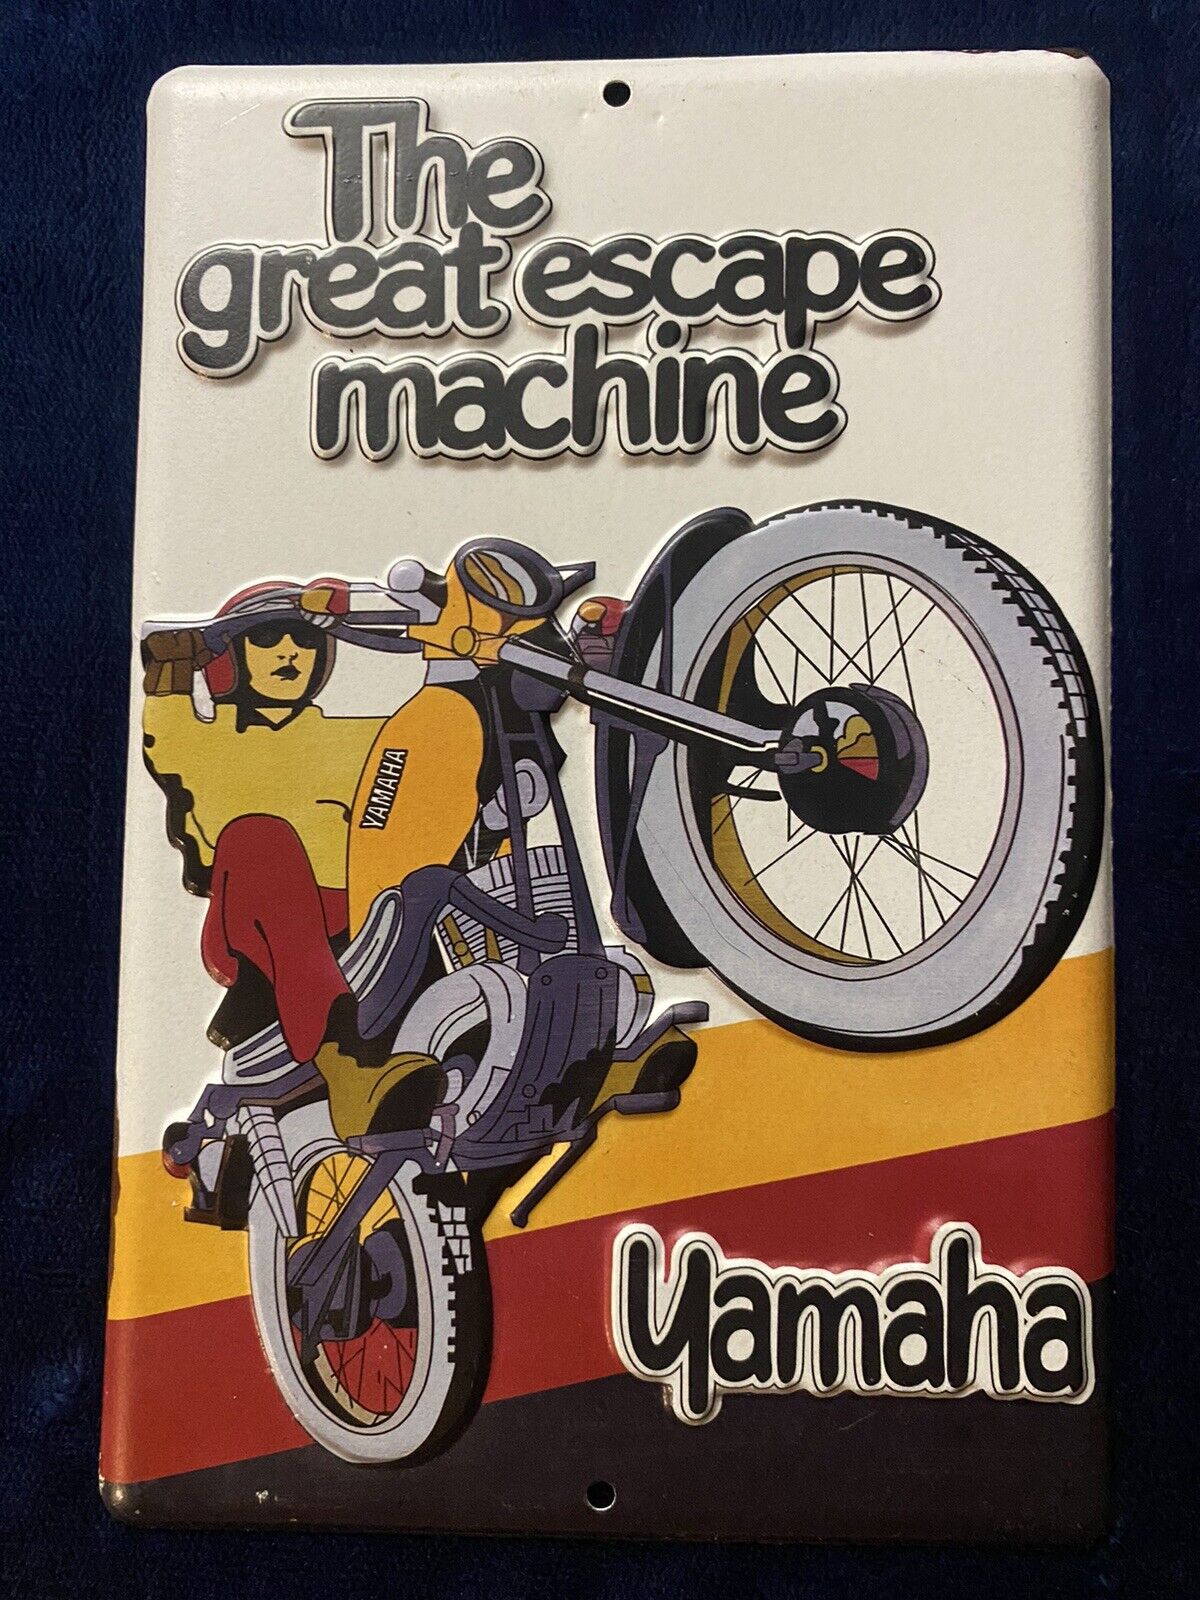 YAMAHA - The Great Escape Machine - Distressed Metal Sign - Vintage Reproduction